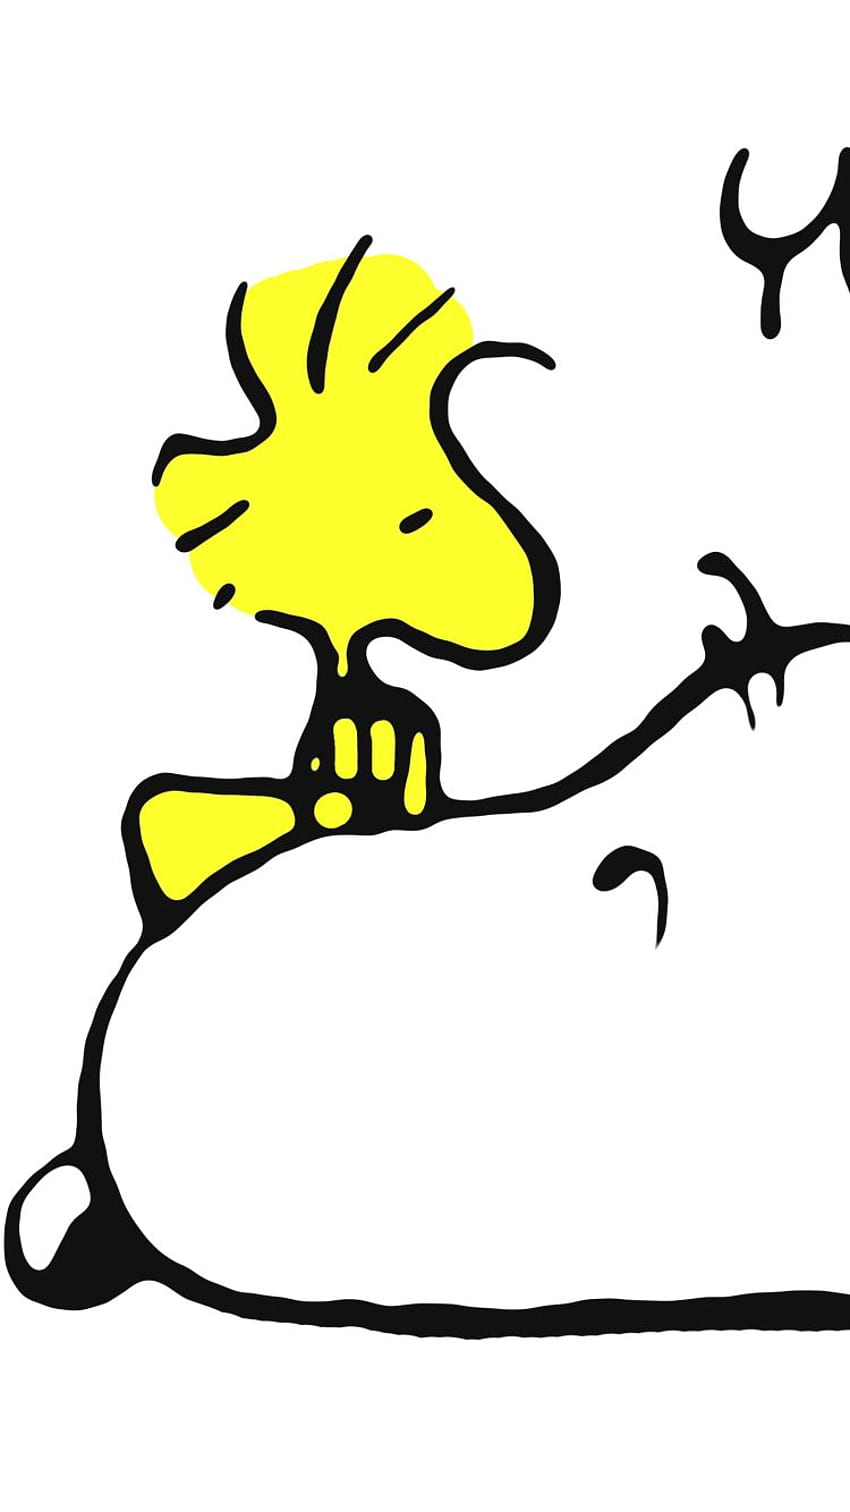 Snoopy And Woodstock  Wallpaper by BradSnoopy97 on DeviantArt